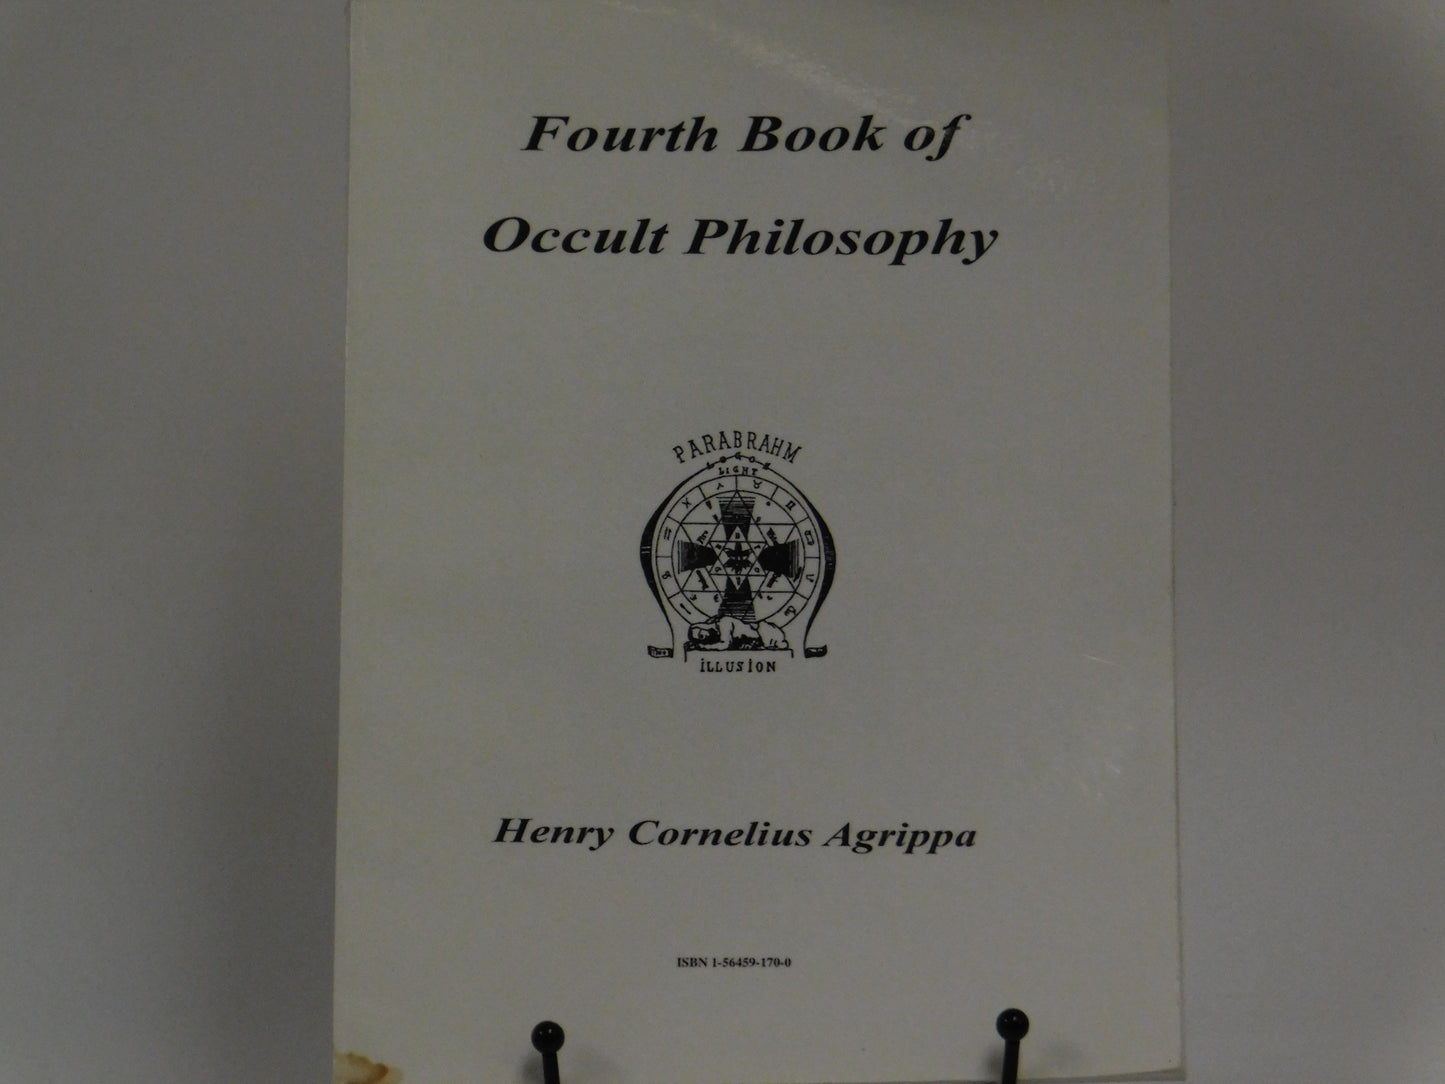 Fourth Book of Occult Philosophy by Henry Cornelius Agrippa